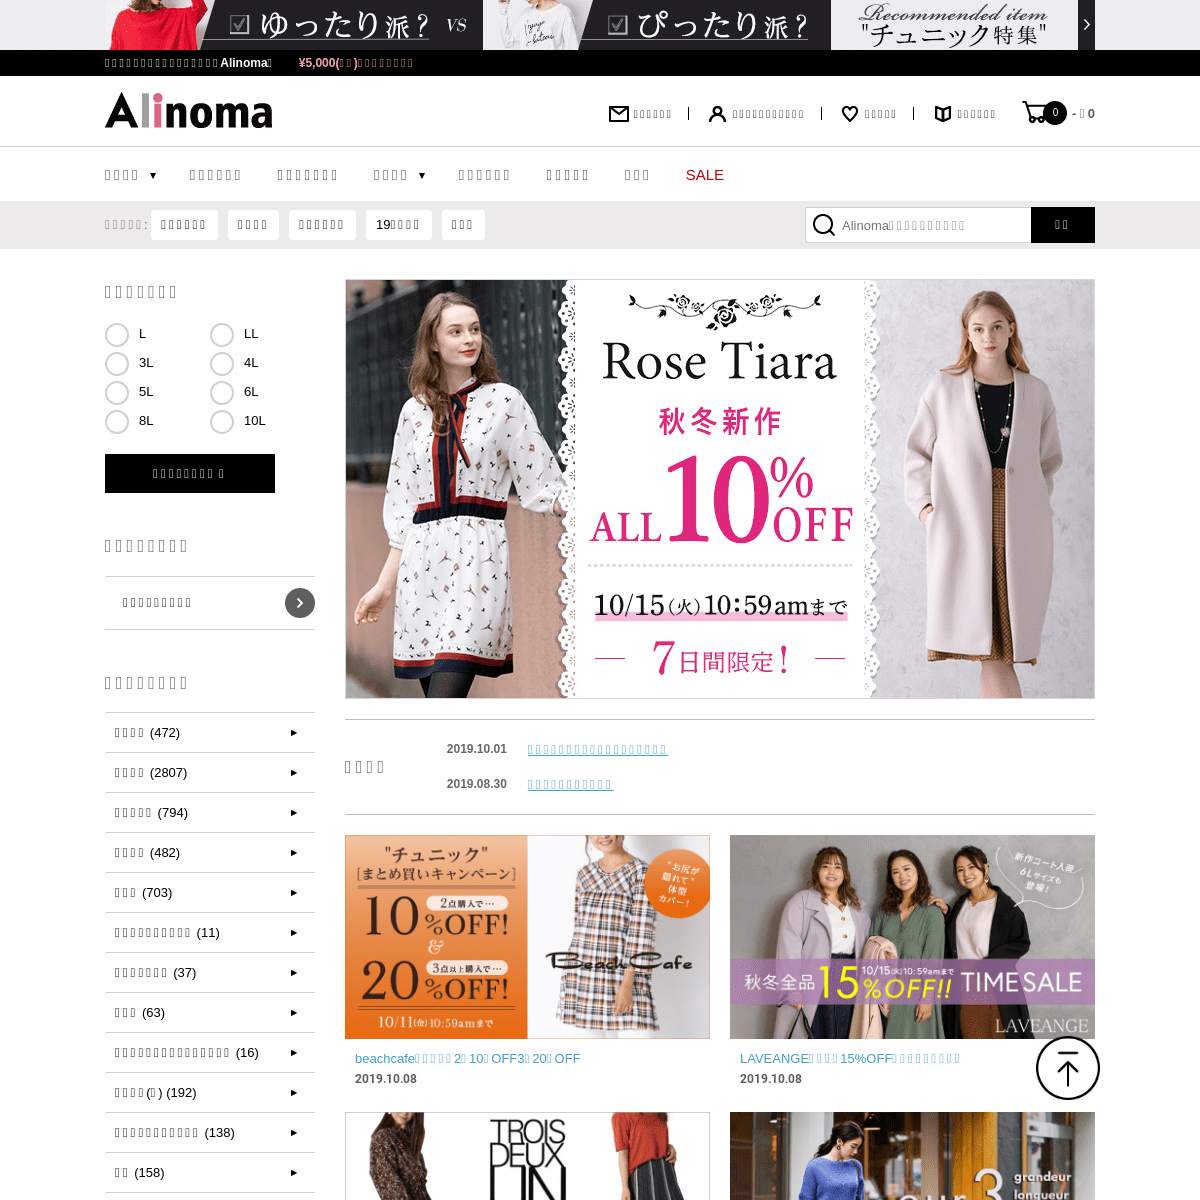 A complete backup of alinoma.jp